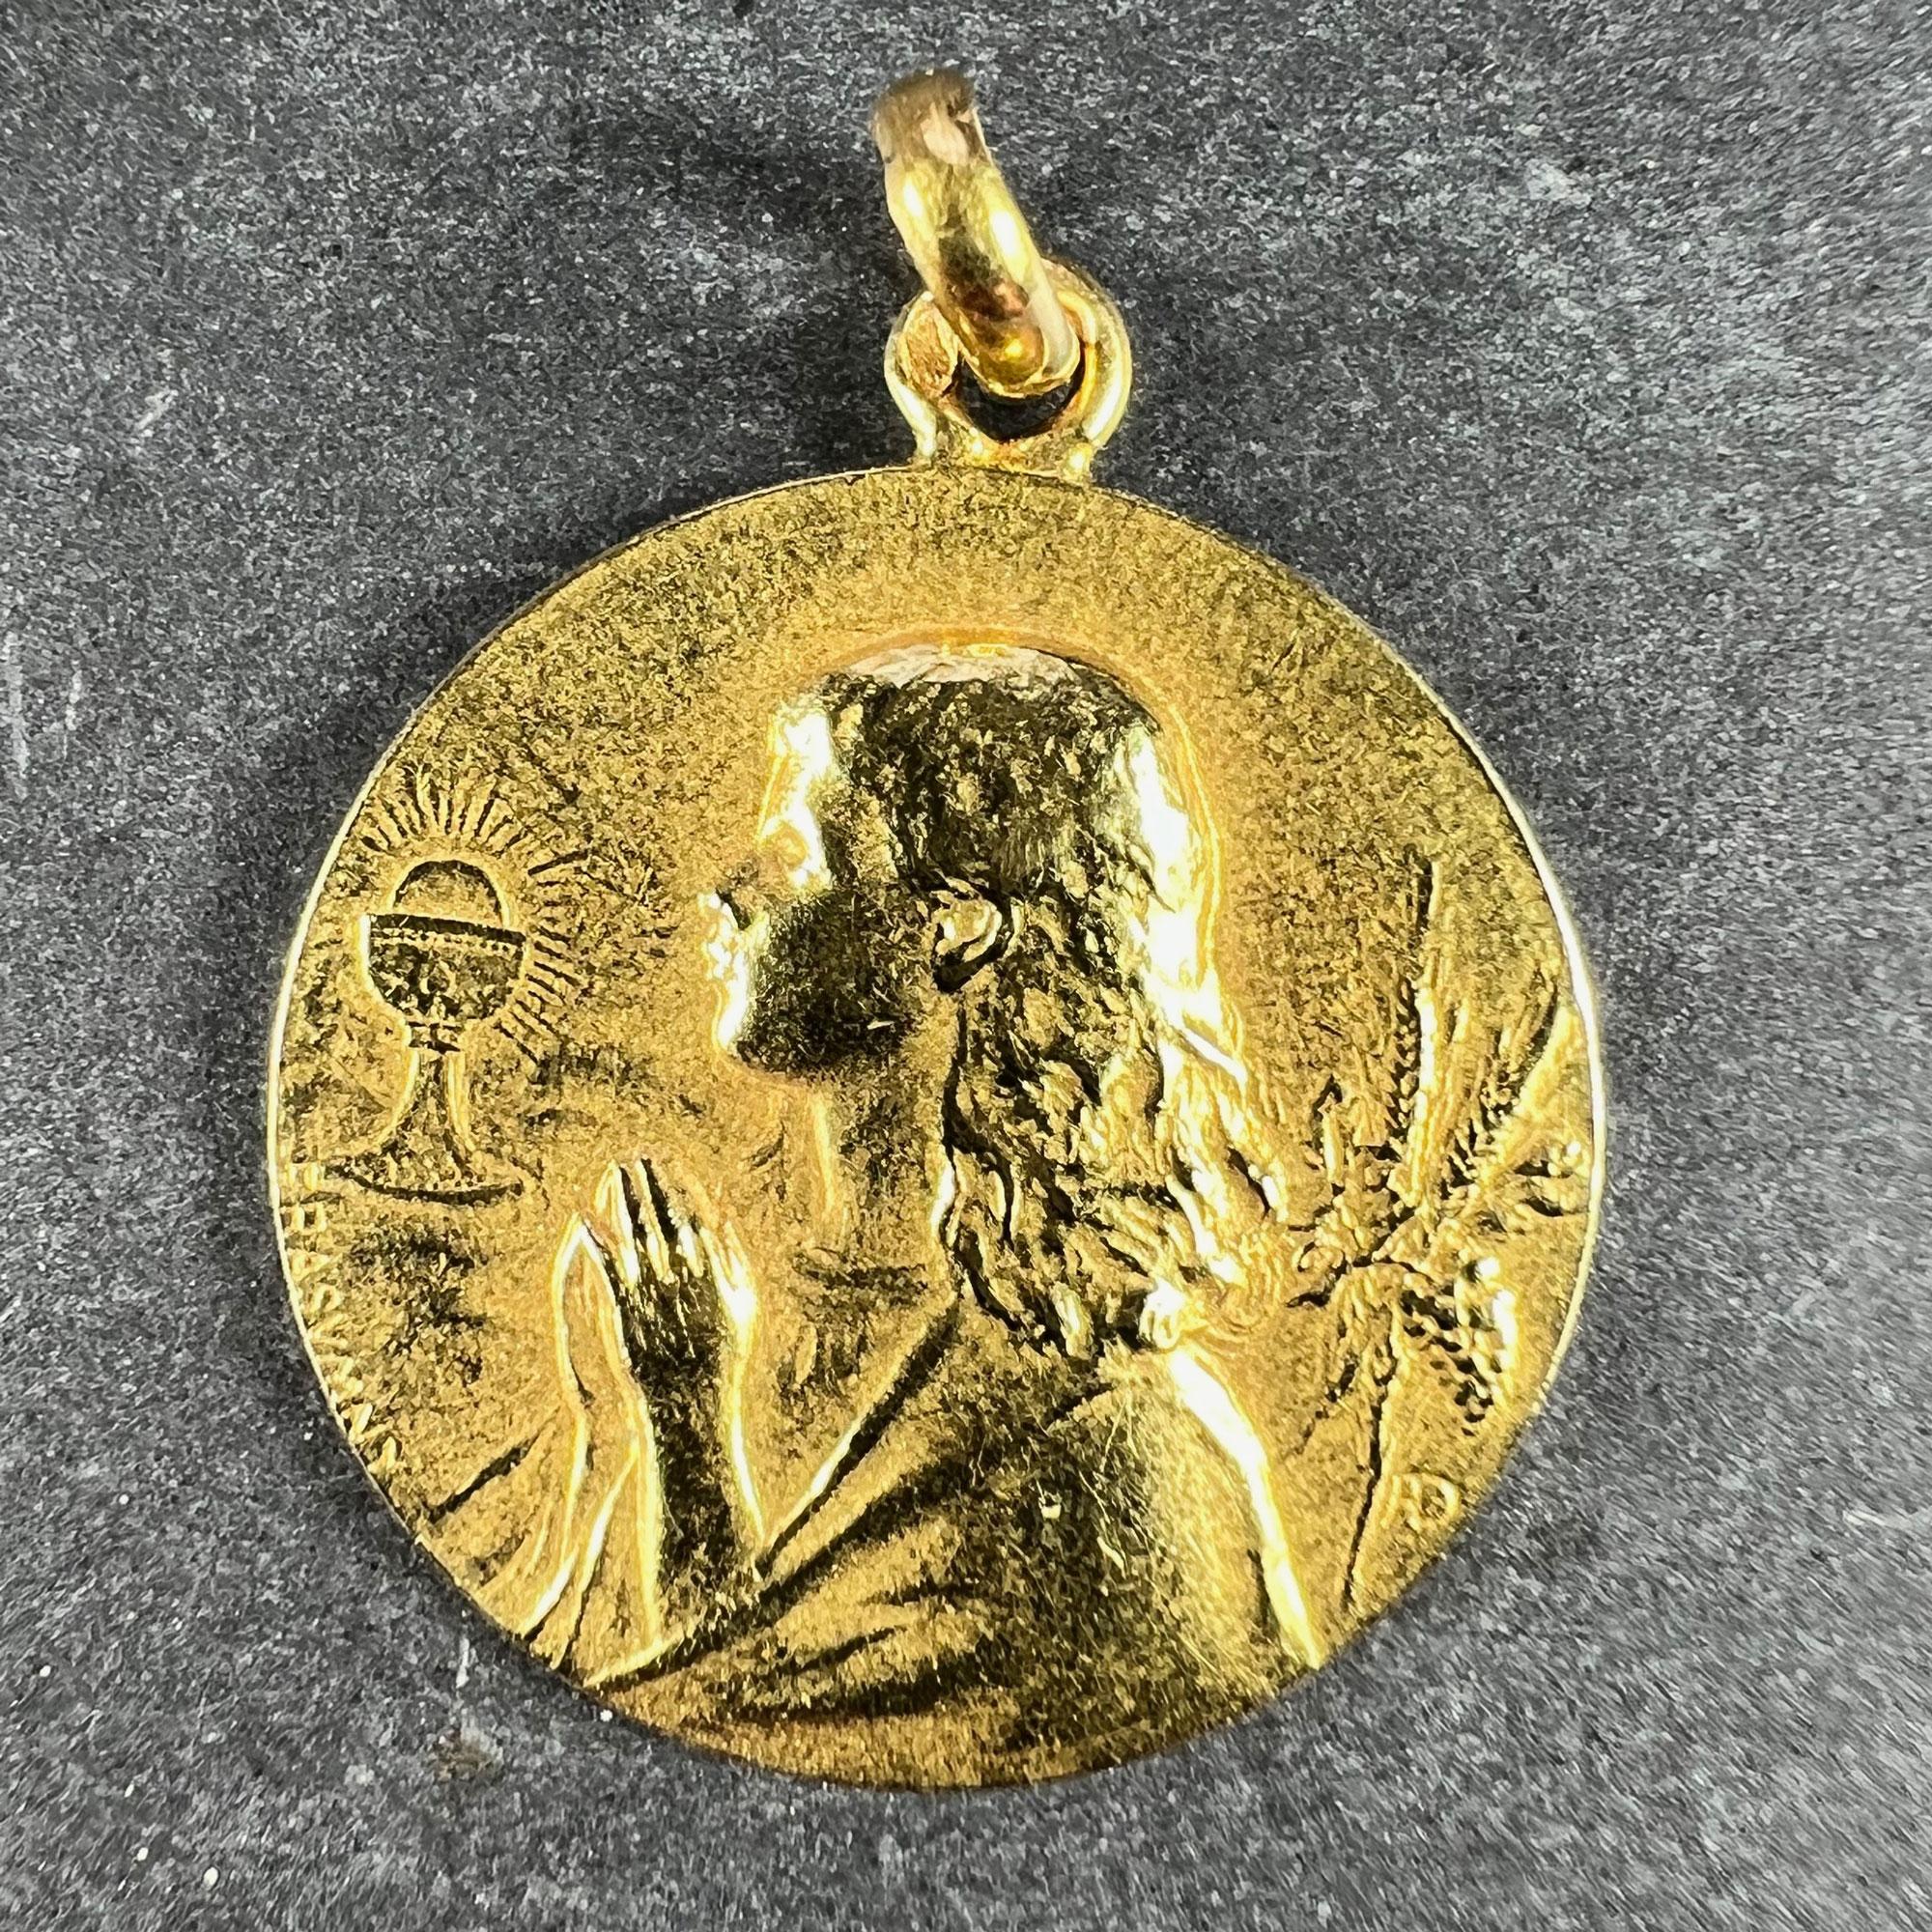 A French 18 karat (18K) yellow gold charm pendant designed as an engraved medal depicting a praying child with a chalice of wine and a bunch of wheat ears, the reverse showing bunches of grapes and wheat.

Signed F. Rasumny for Felix Rasumny